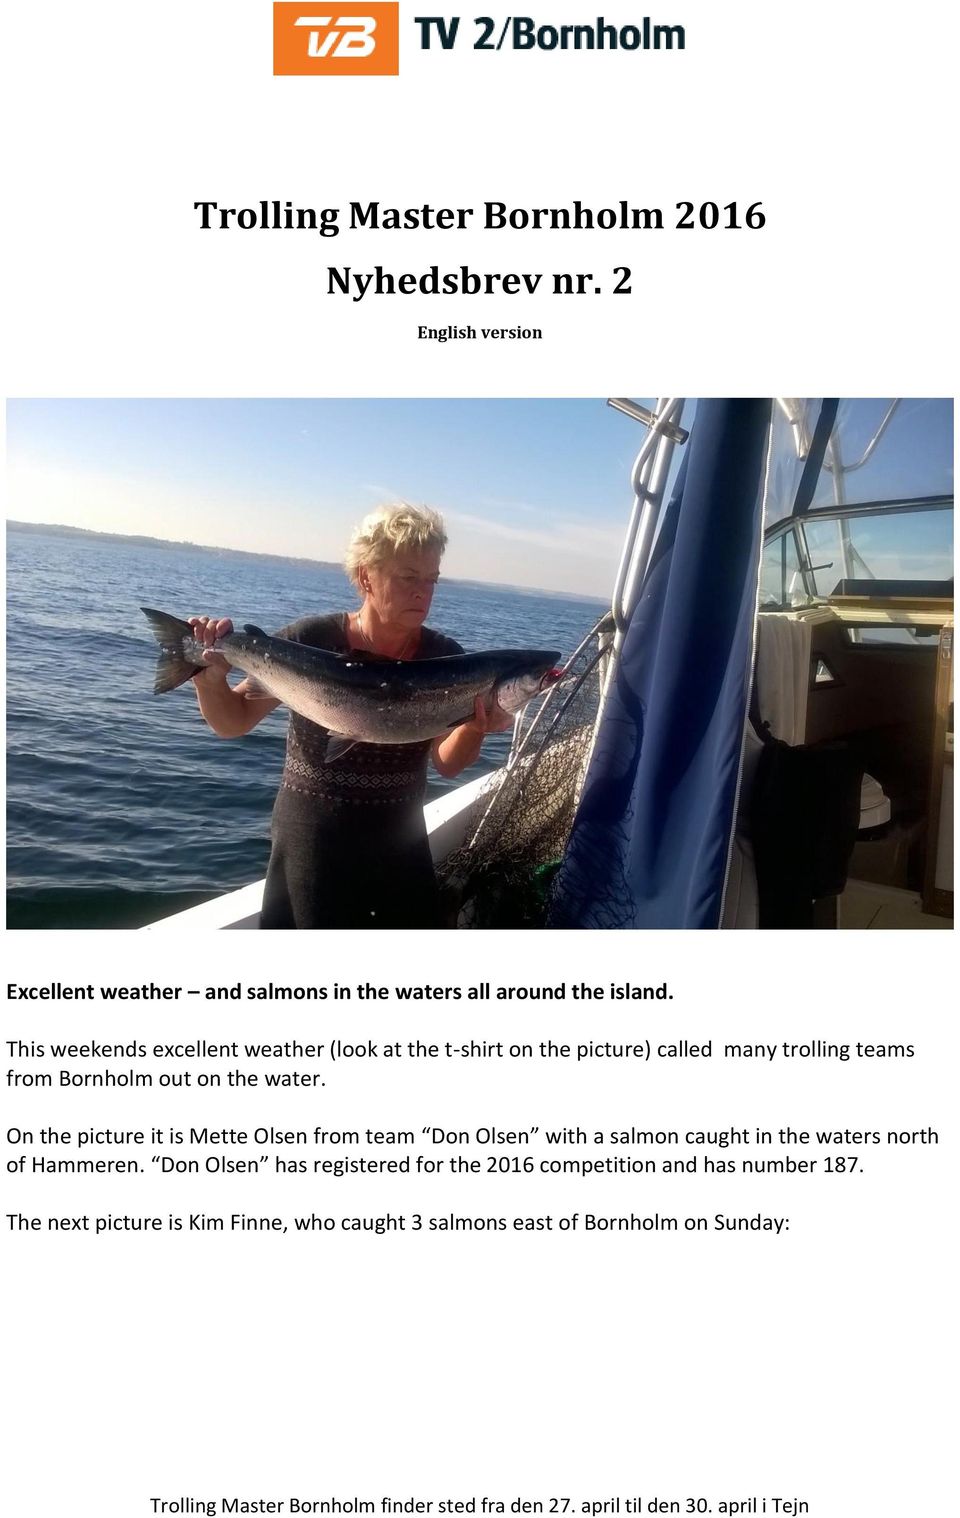 On the picture it is Mette Olsen from team Don Olsen with a salmon caught in the waters north of Hammeren.